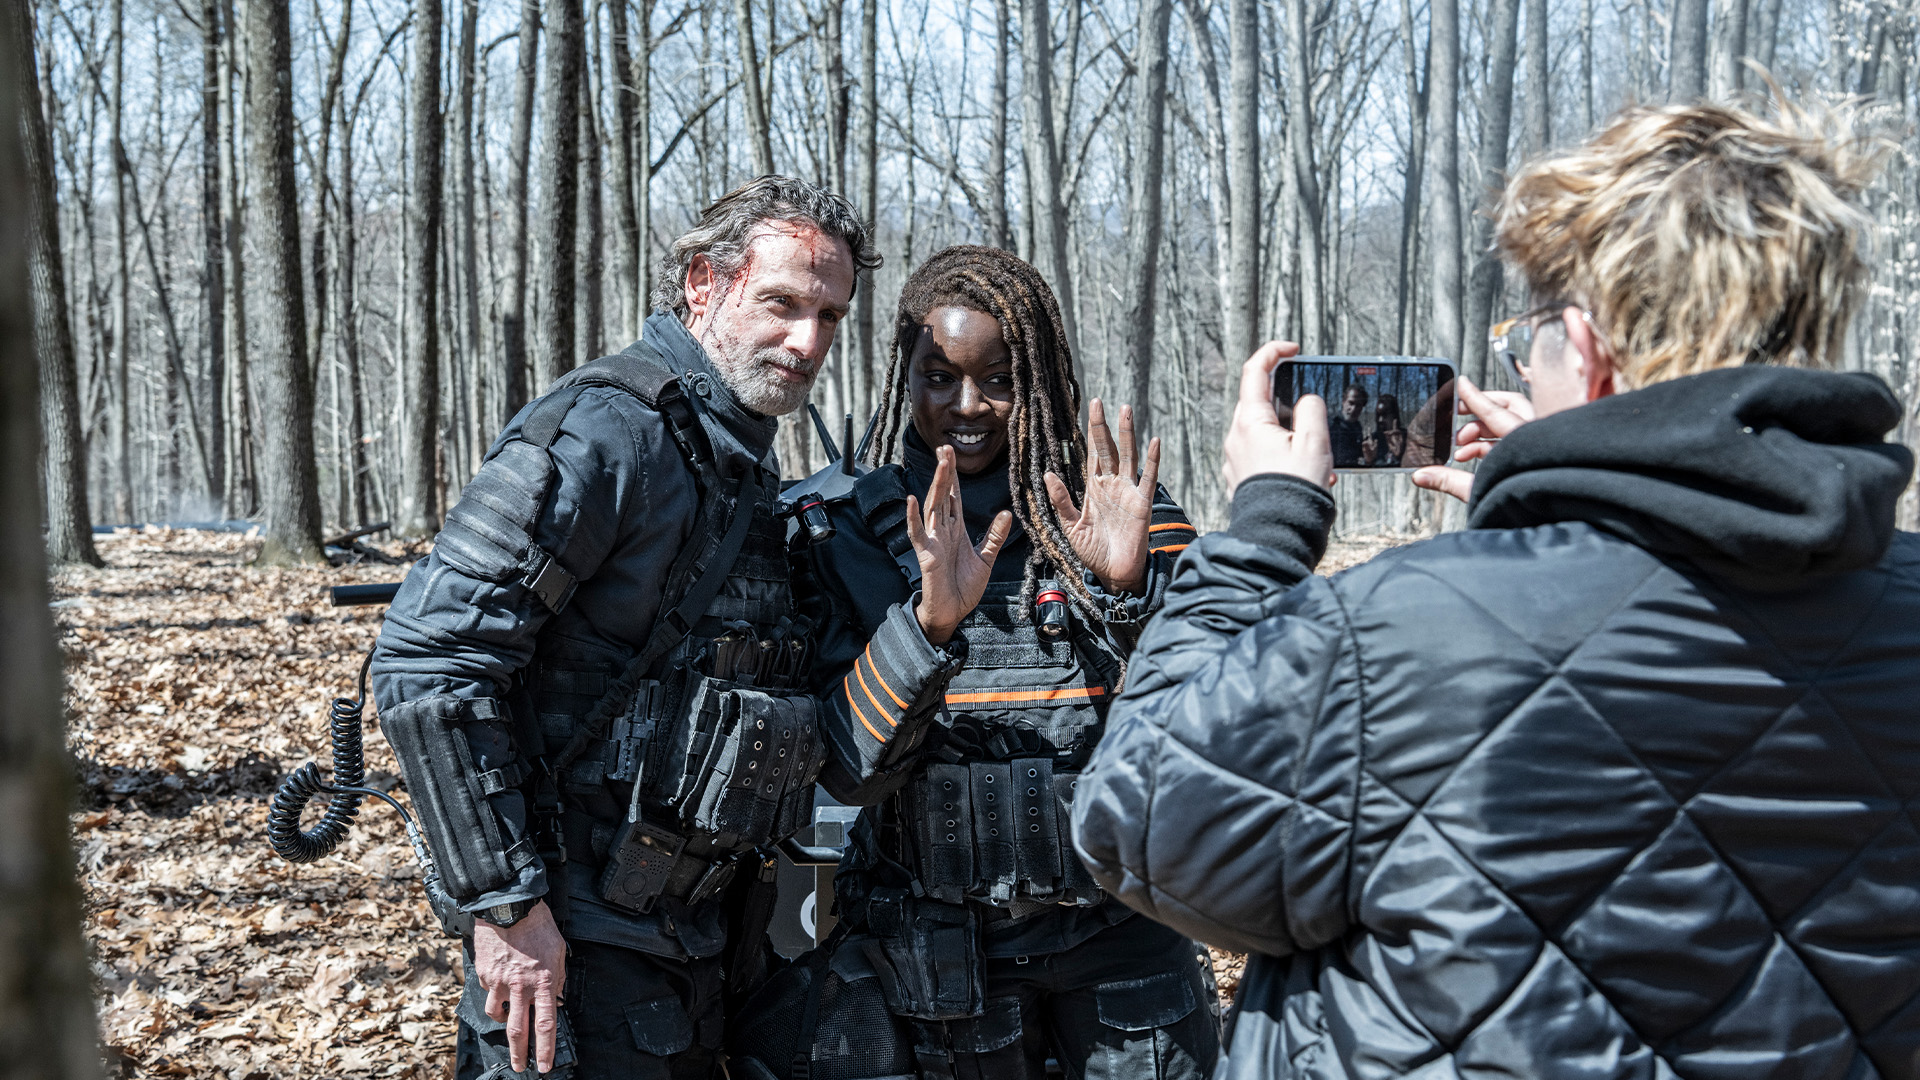 TOWL Cast Diaries 103: Bye, Rick and Michonne have to find a way to survive., Season 1067235, Episode 3